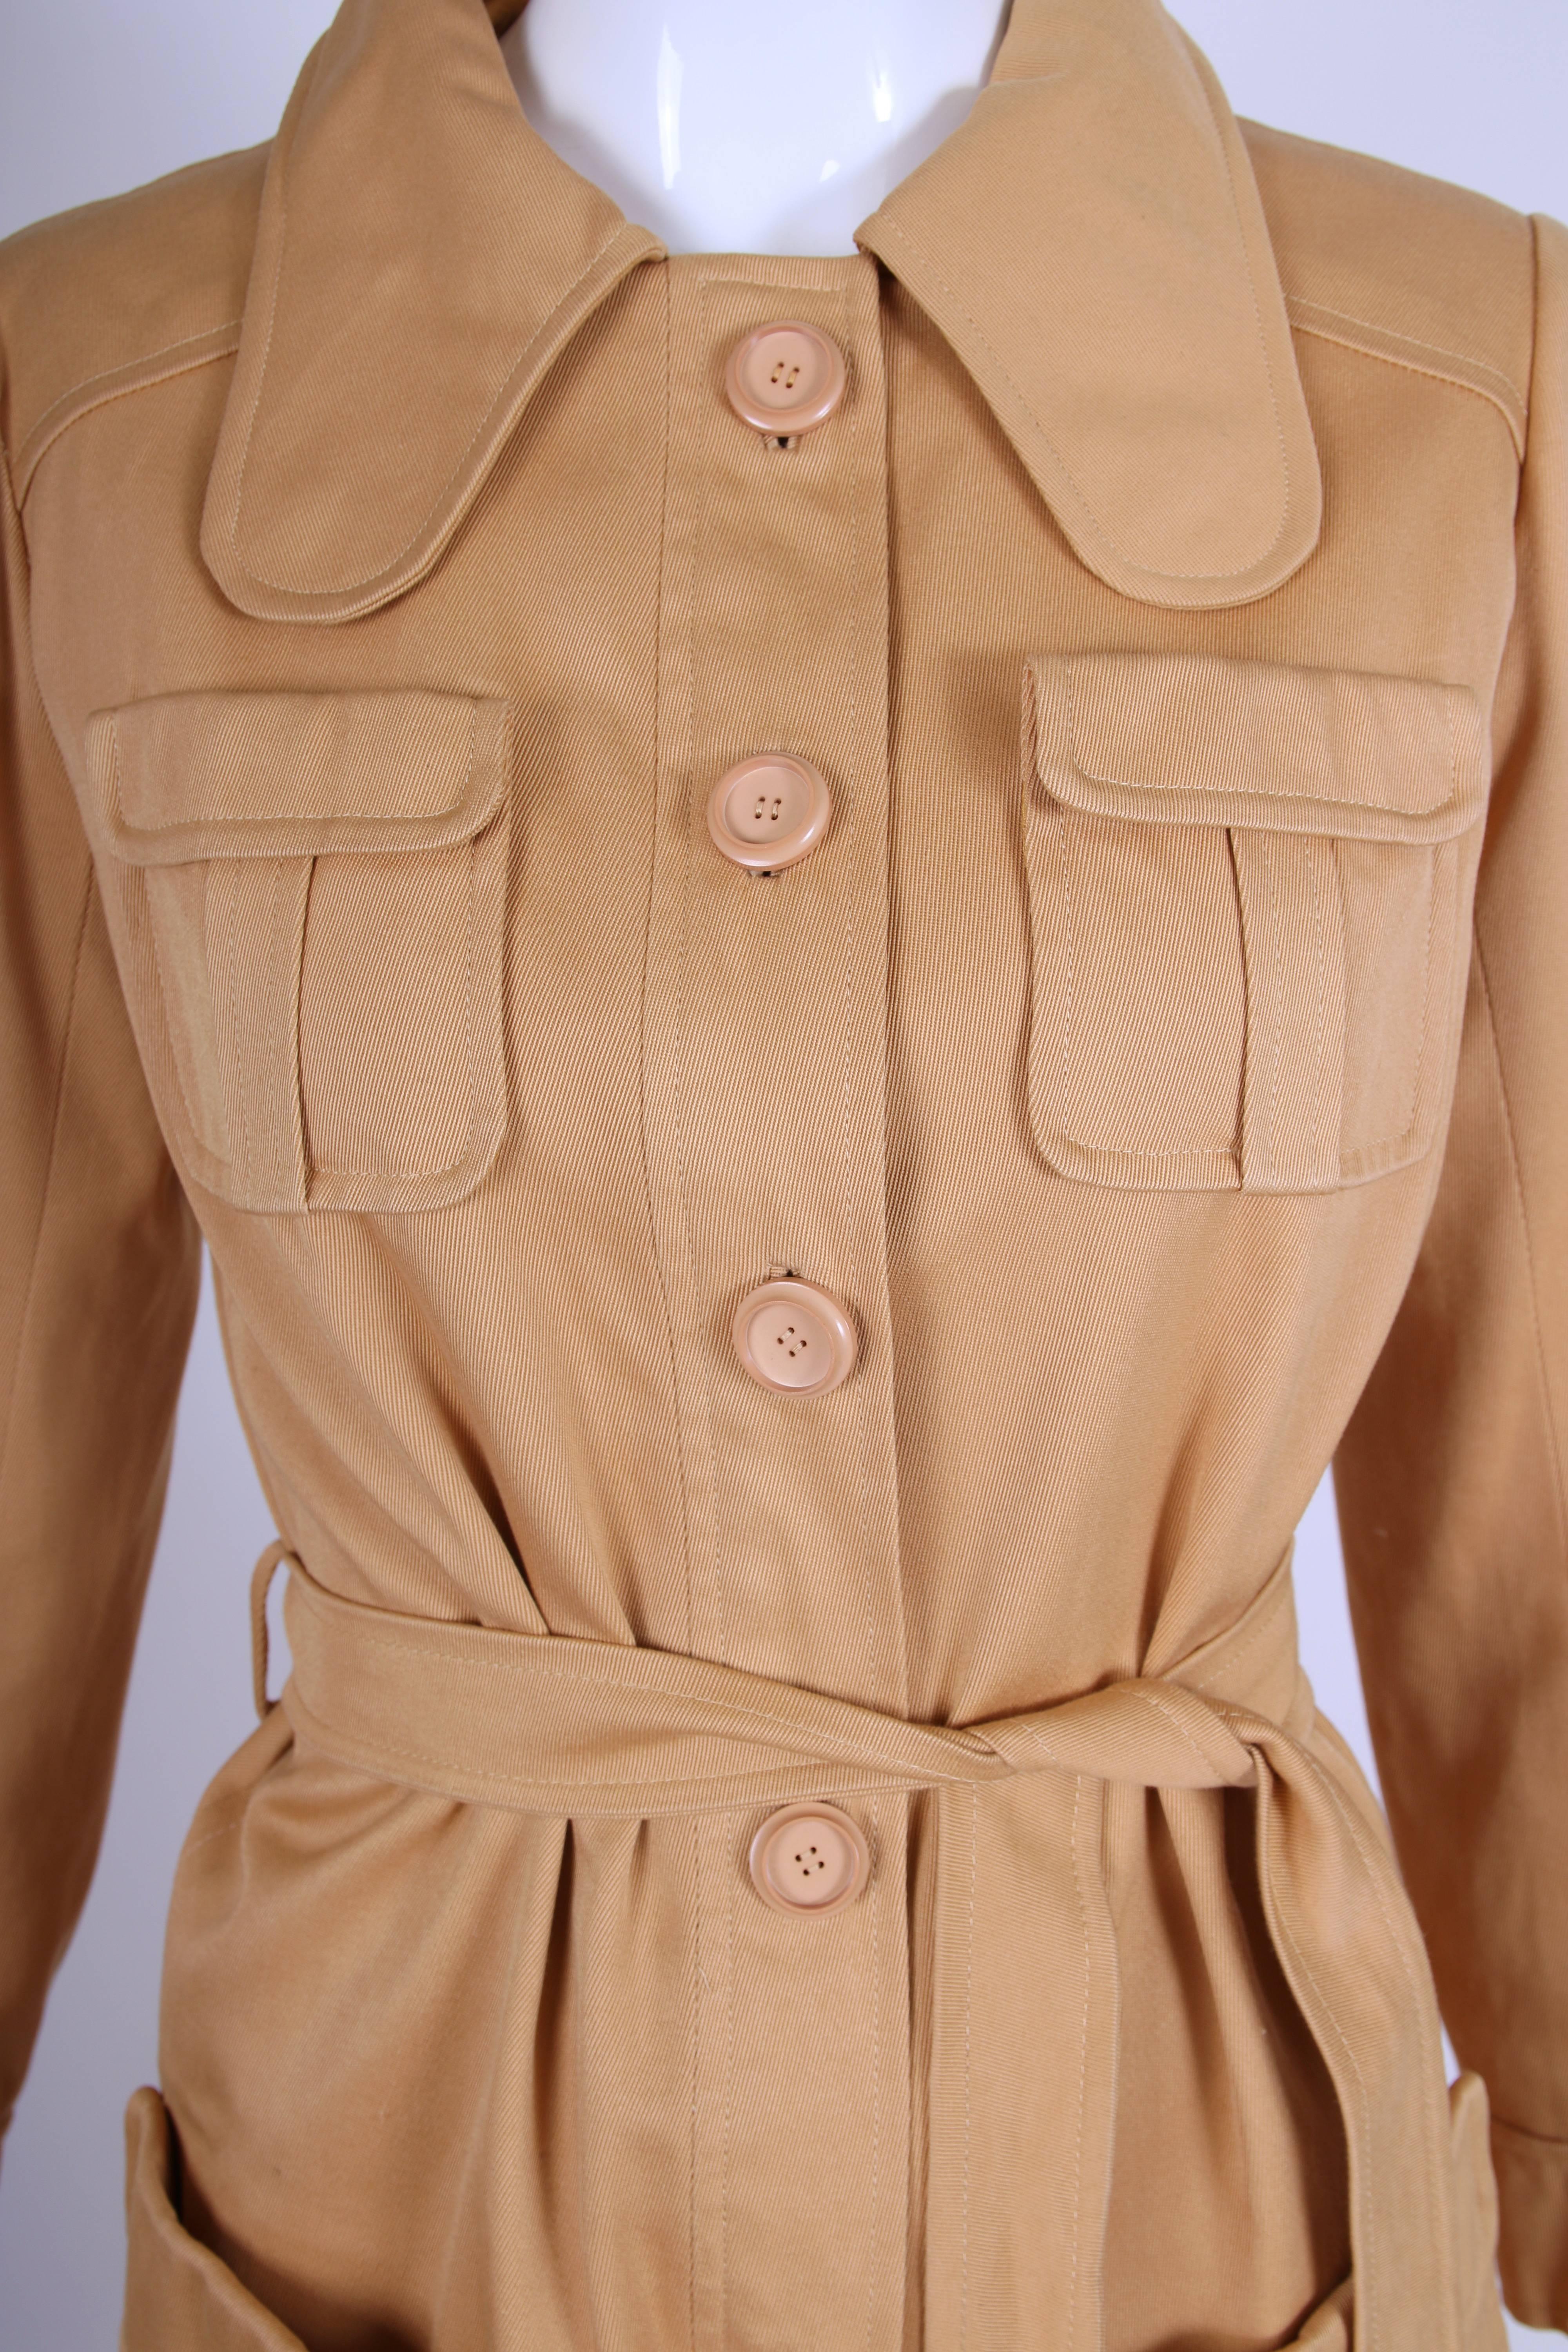 Attrib. to 1970's  Ungaro Belted Jacket Top  For Sale 2